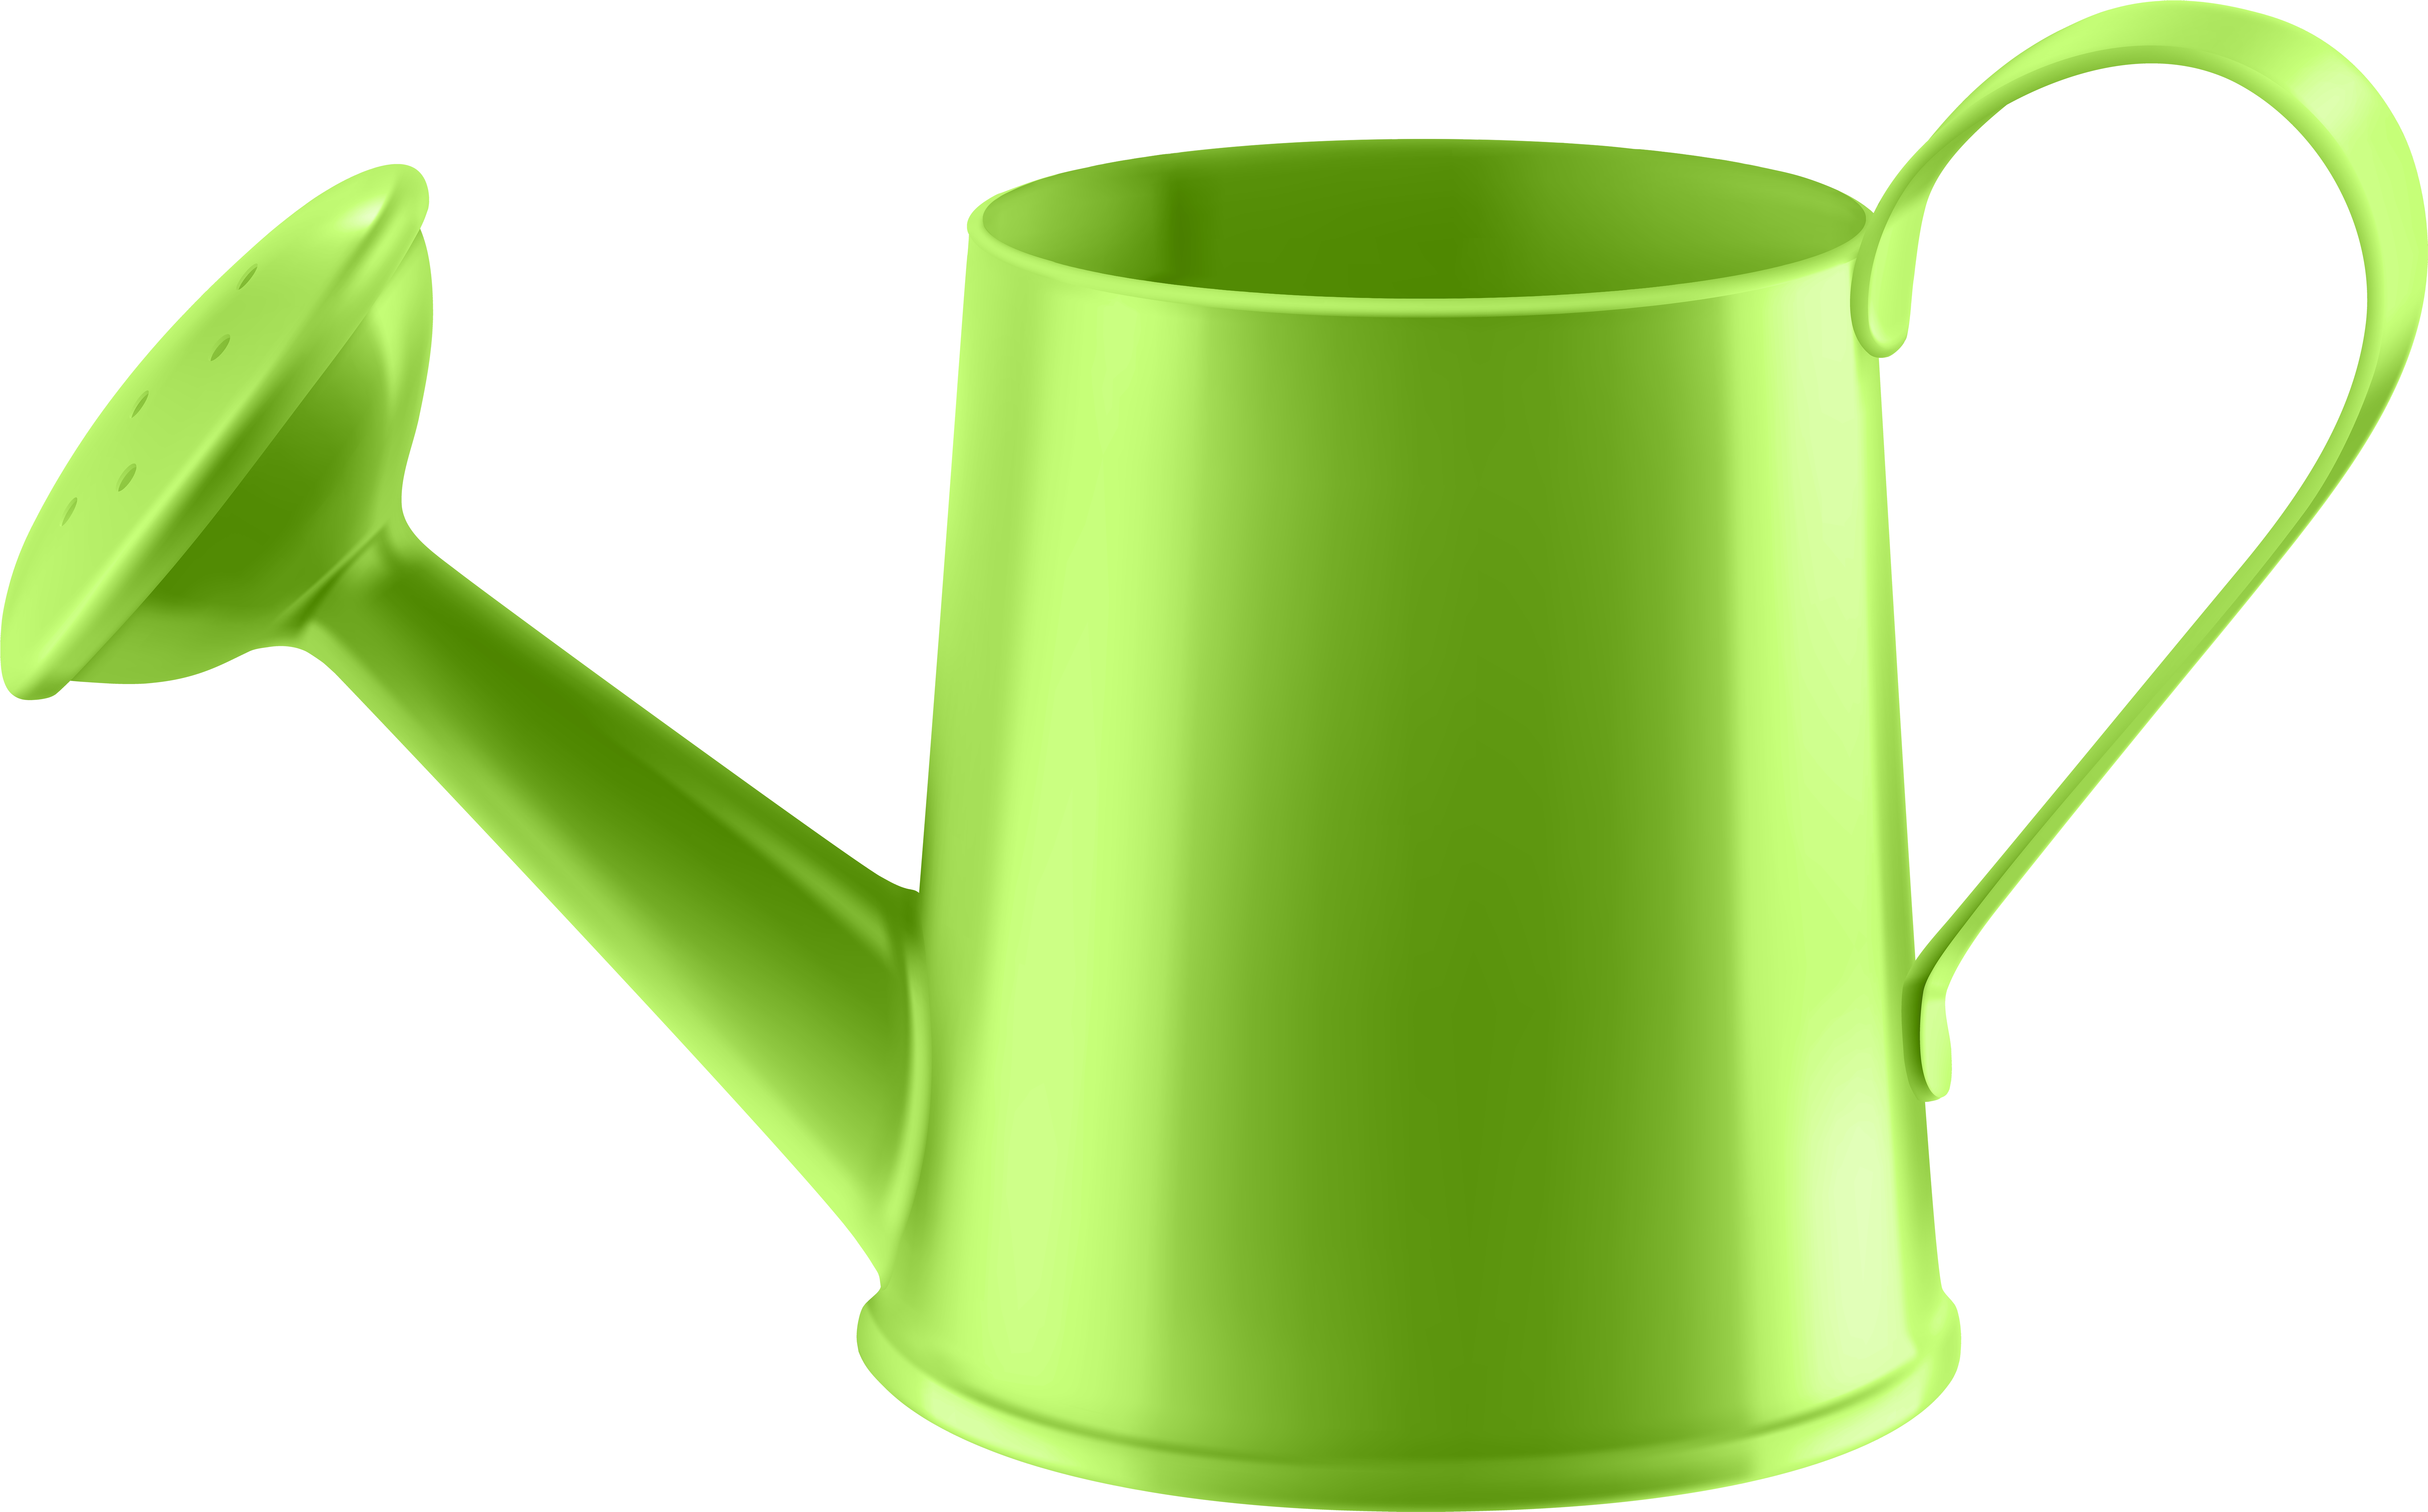 Green Watering Can Image